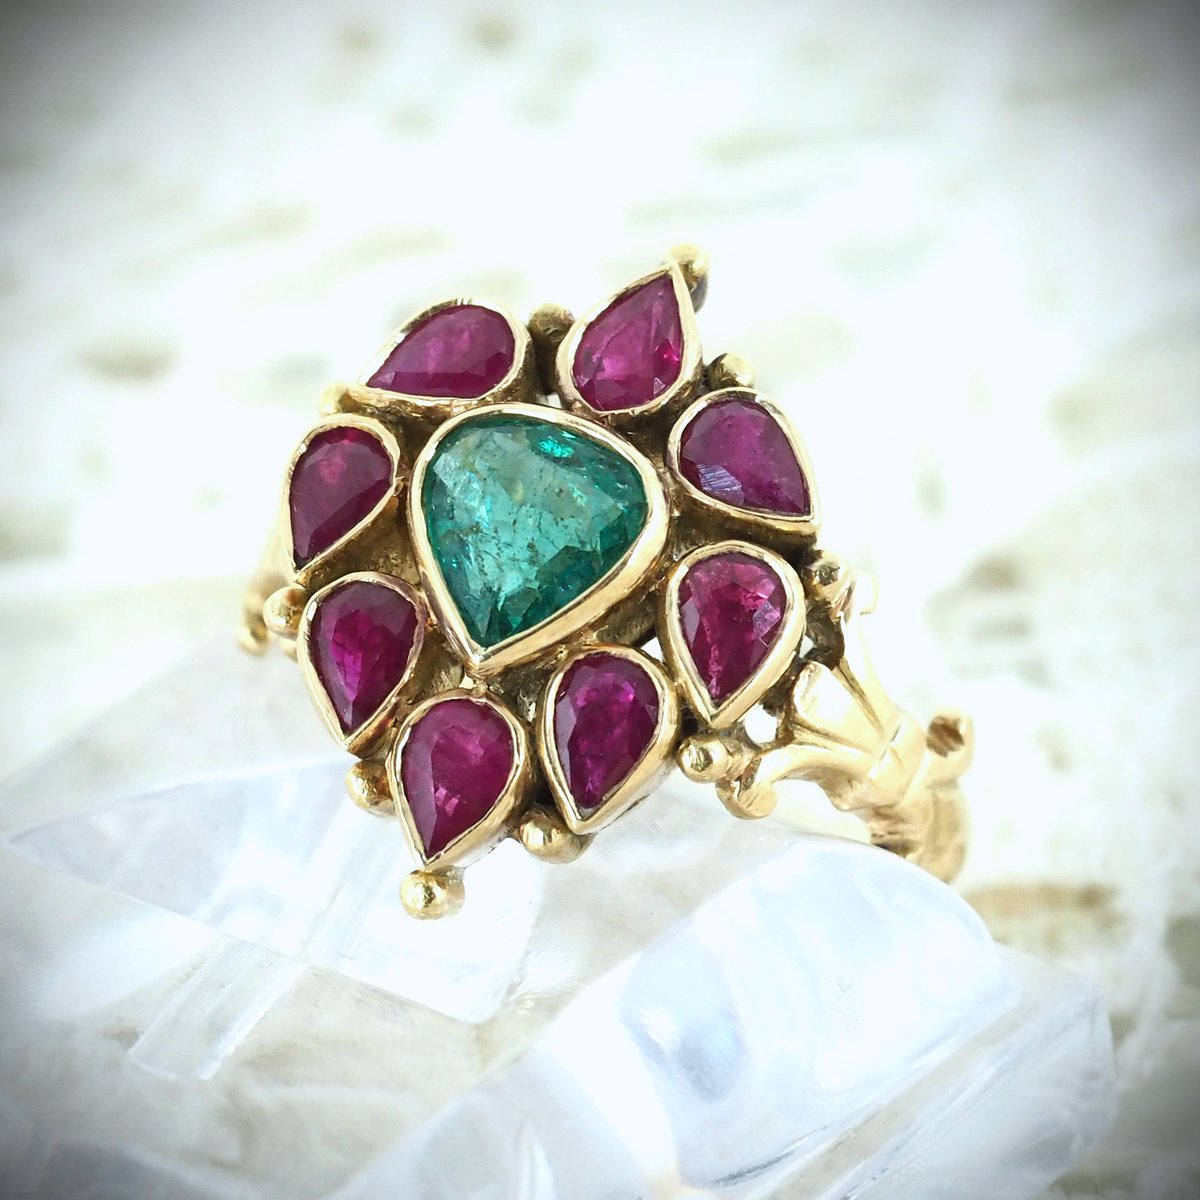 Estate massive 18K solid gold ring with one natural emerald and 8 natural rubies Fine retro statement jewelry Hallmarked
ow.ly/nPhI50Rtnpo
#18Ksolidgold #massivegoldring #yellowgold #naturalgemstones #emerald #rubies #highjewelry #cocktail #retroperiod #hallmarked